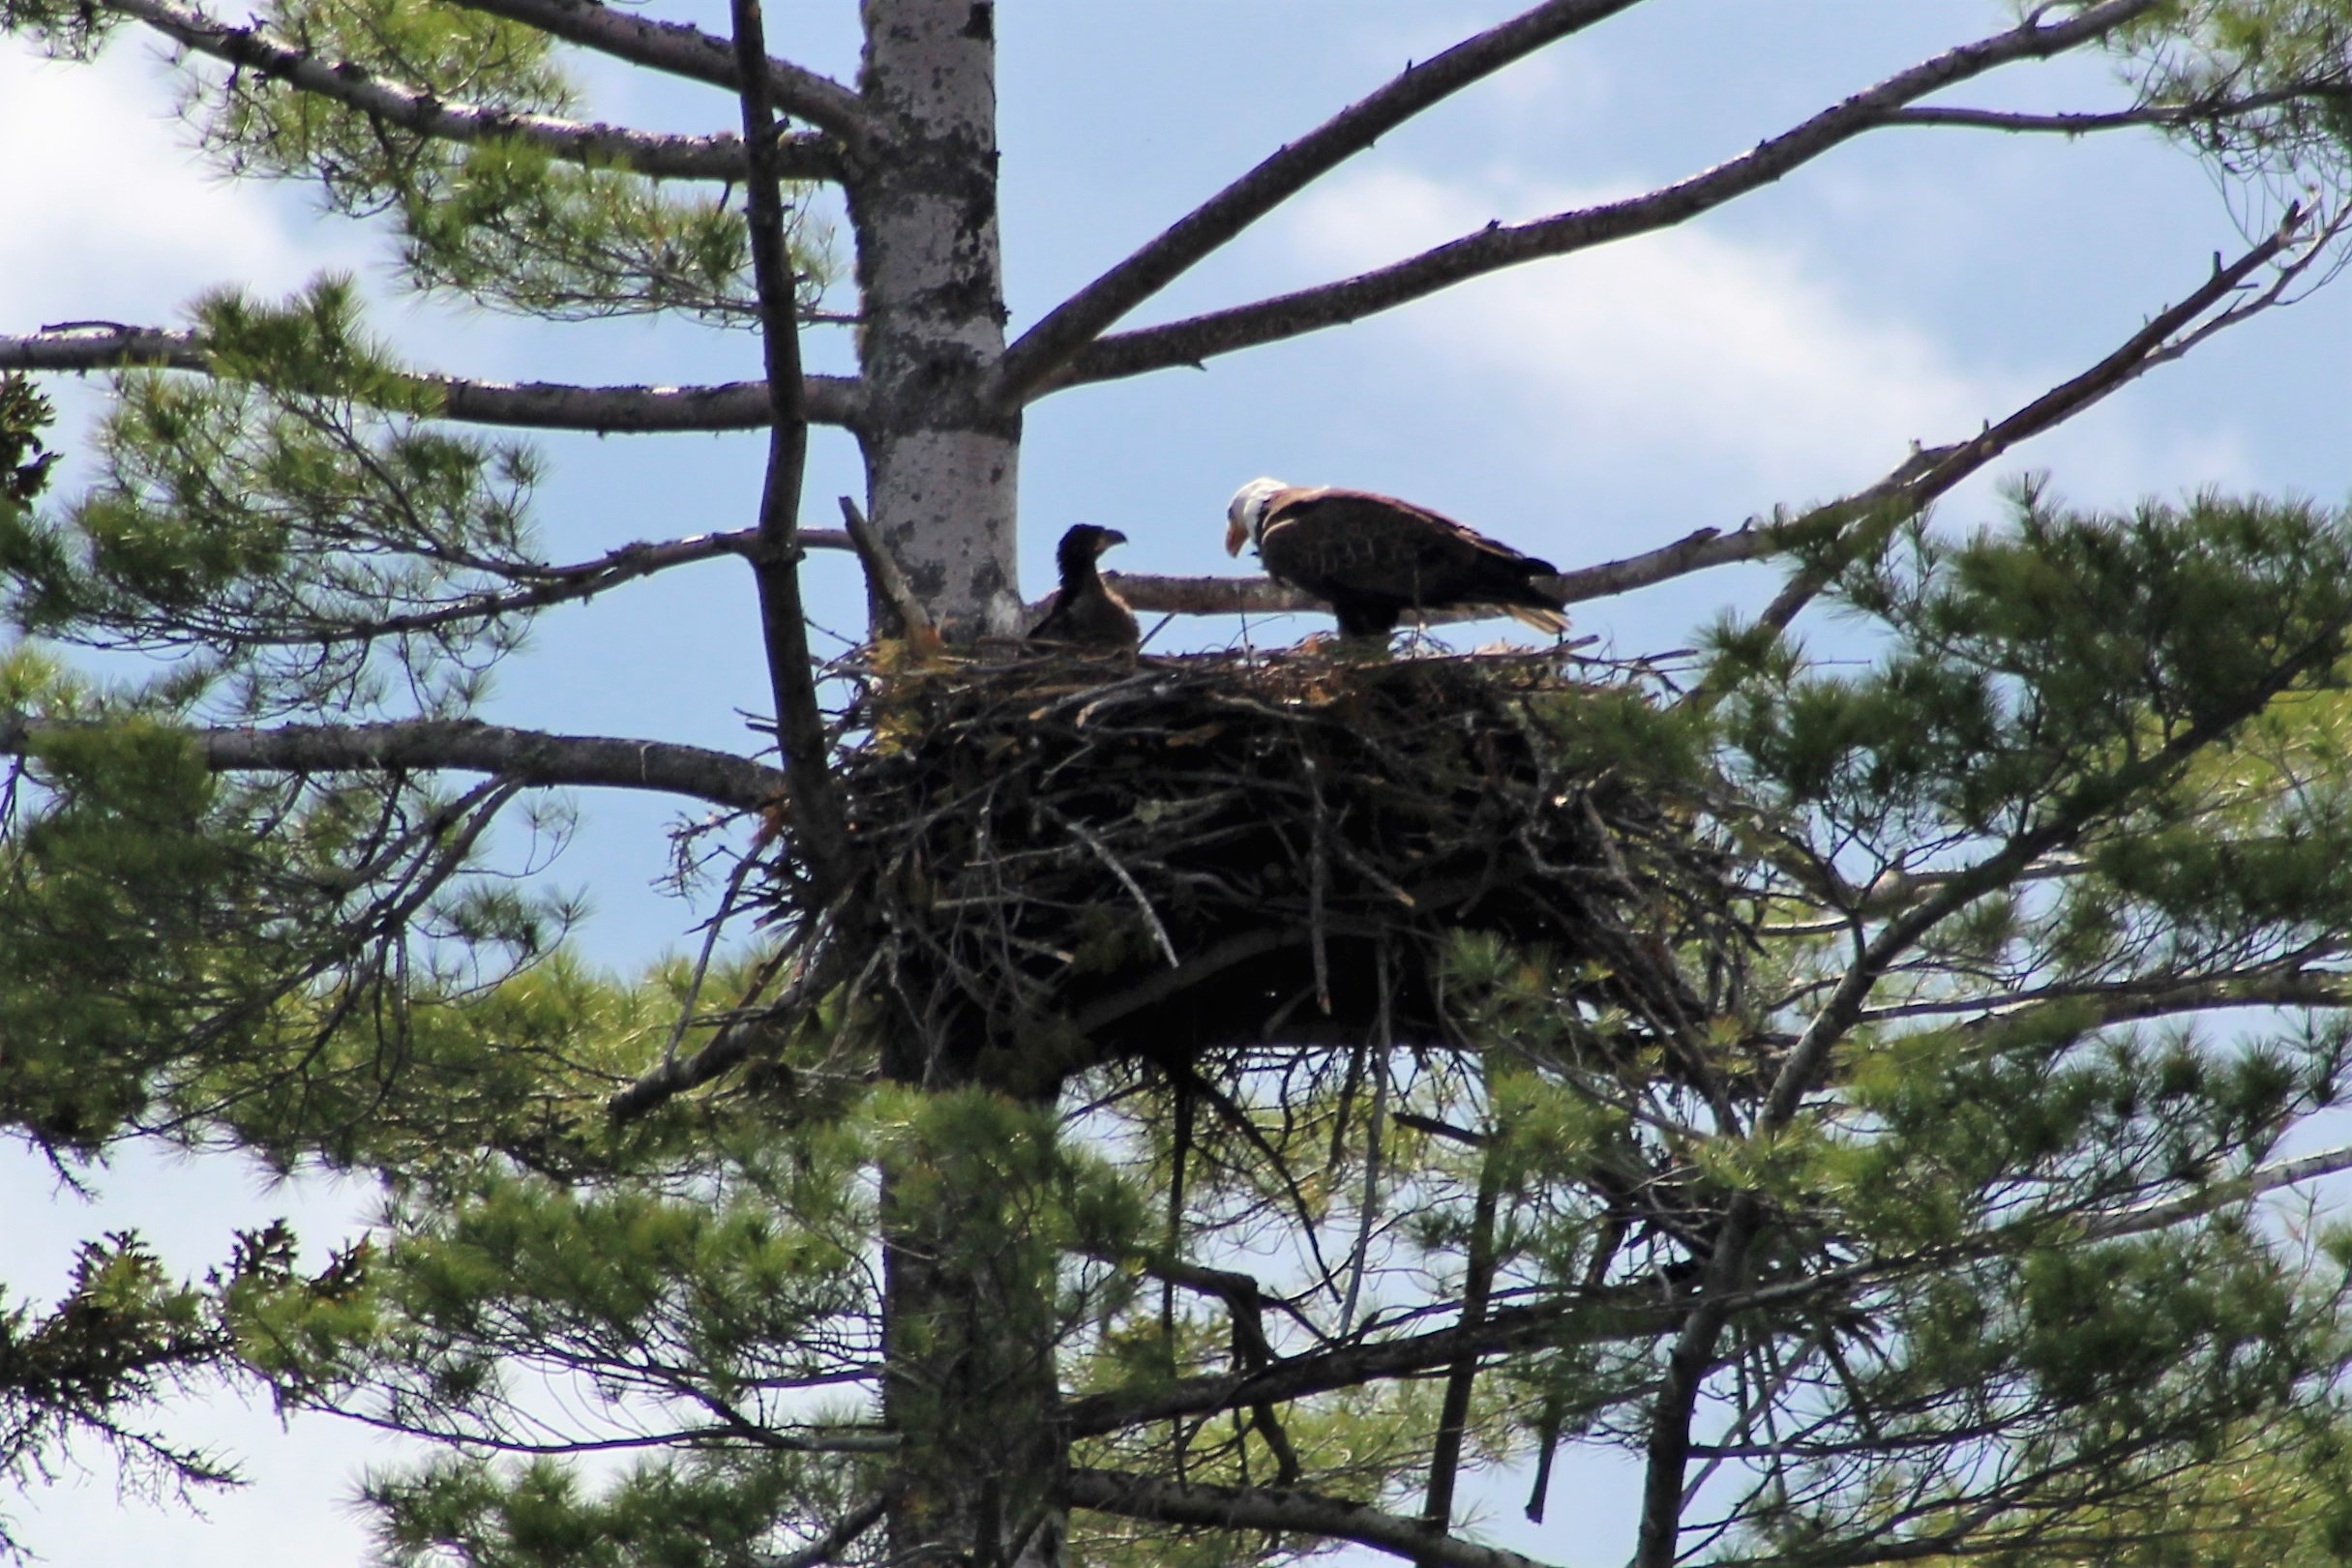 The Eaglet Being Fed